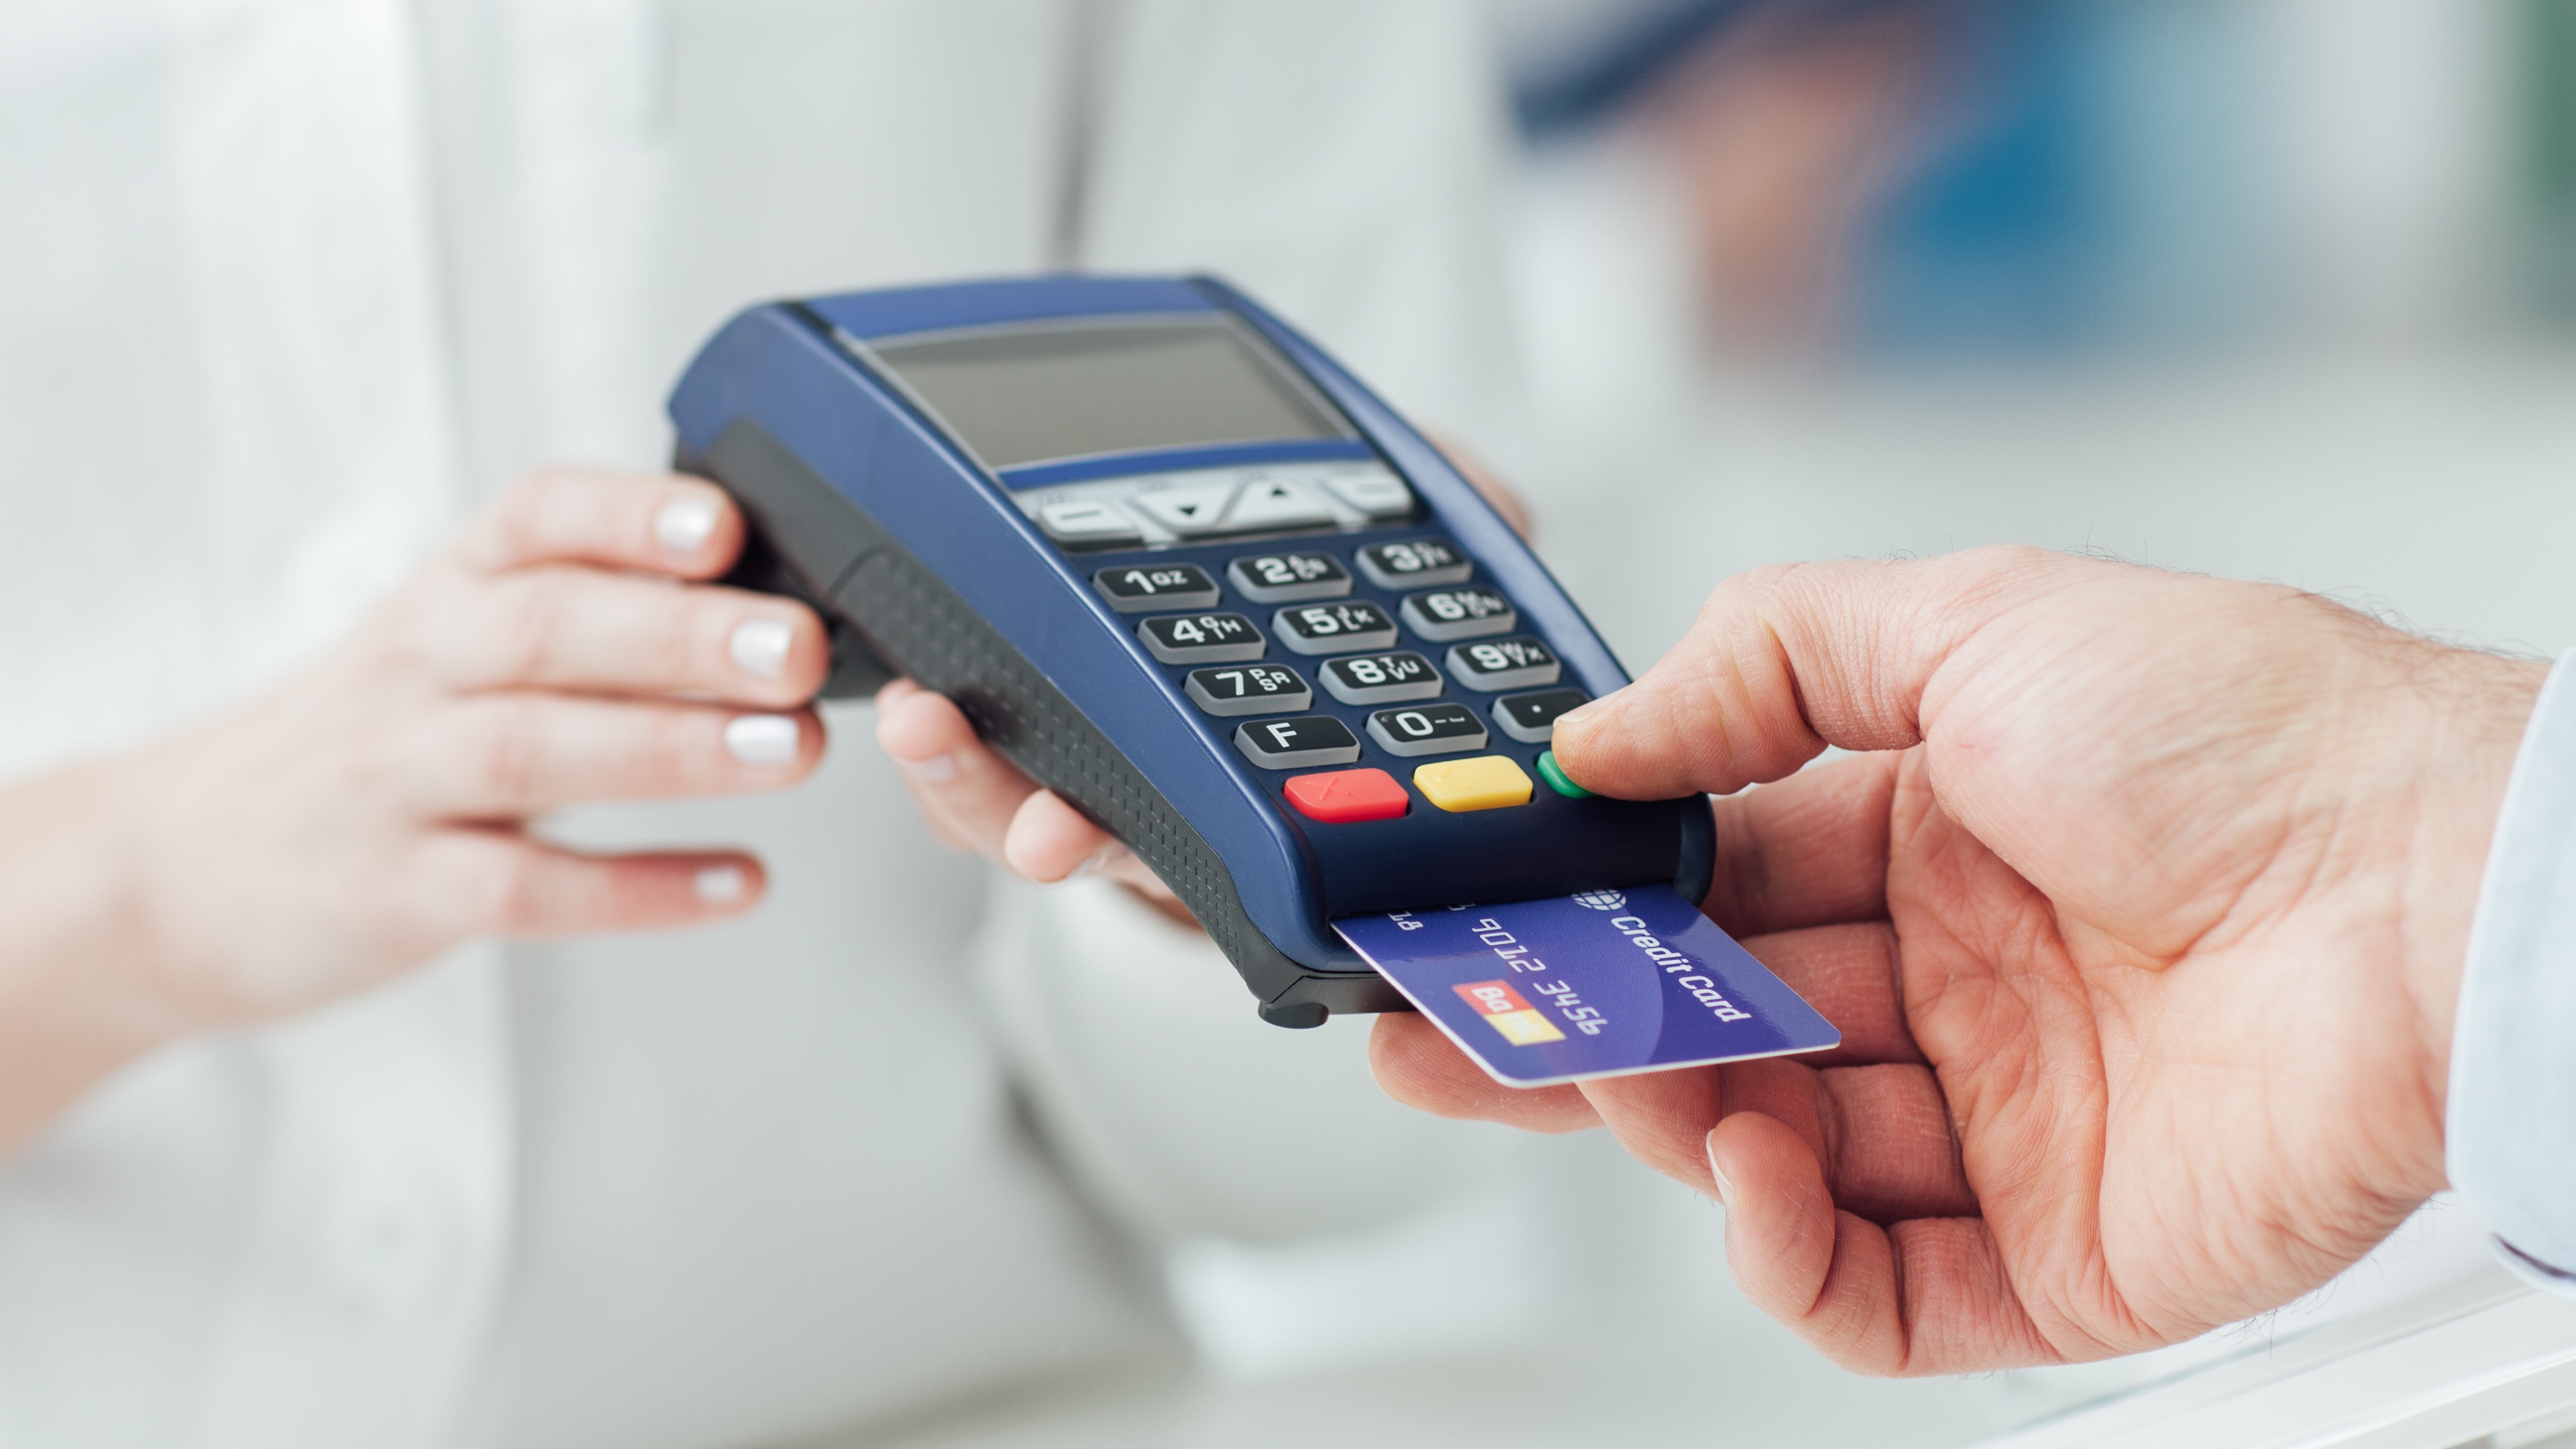 Eftpos payment, credit card, payments